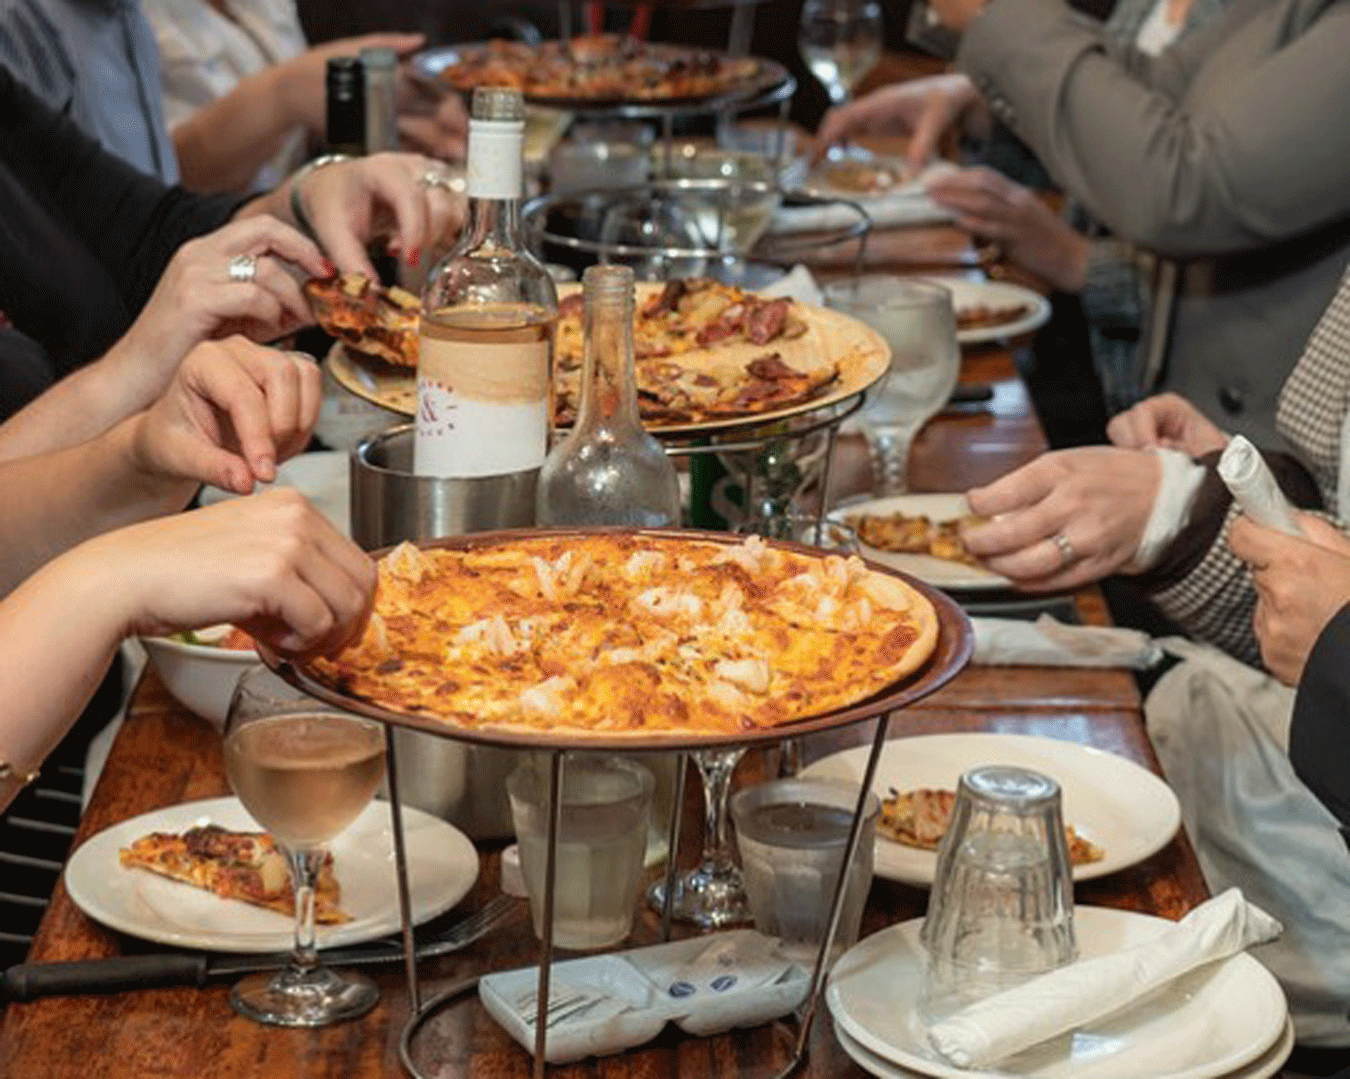 Pizzas on table